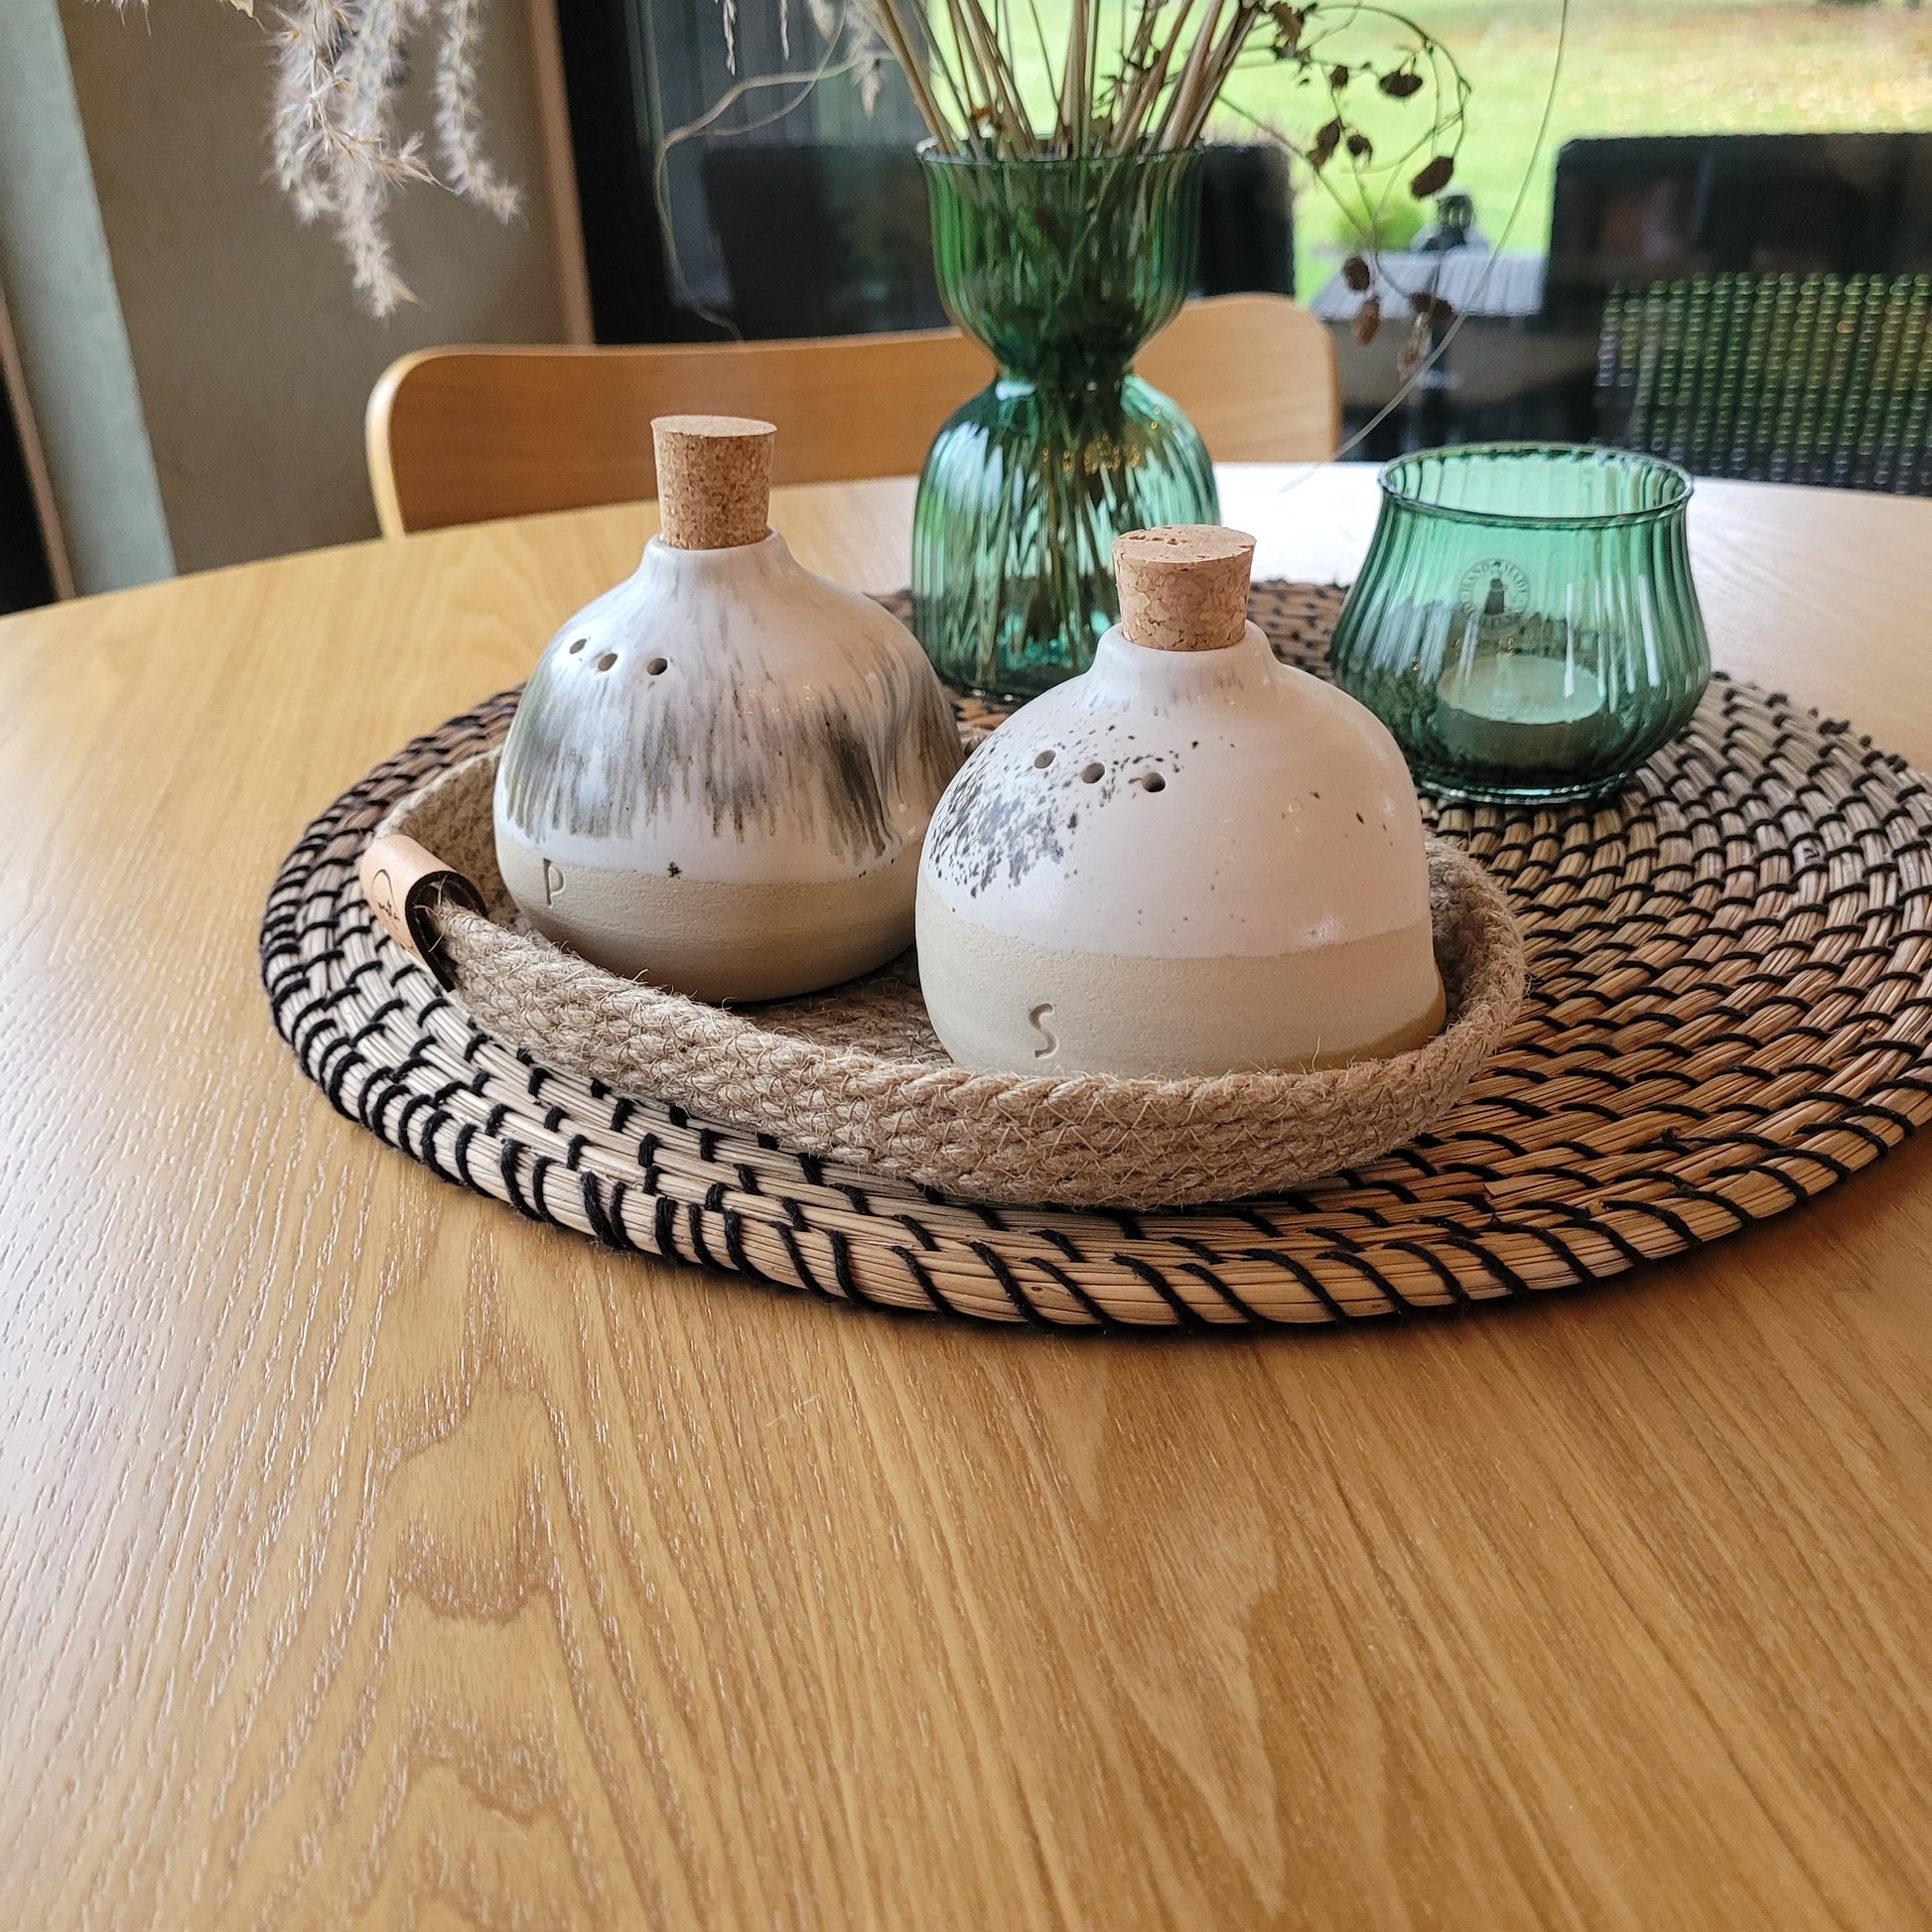 Beautifully detailed ceramic salt and pepper shakers with a natural jute basket for a touch of elegance.